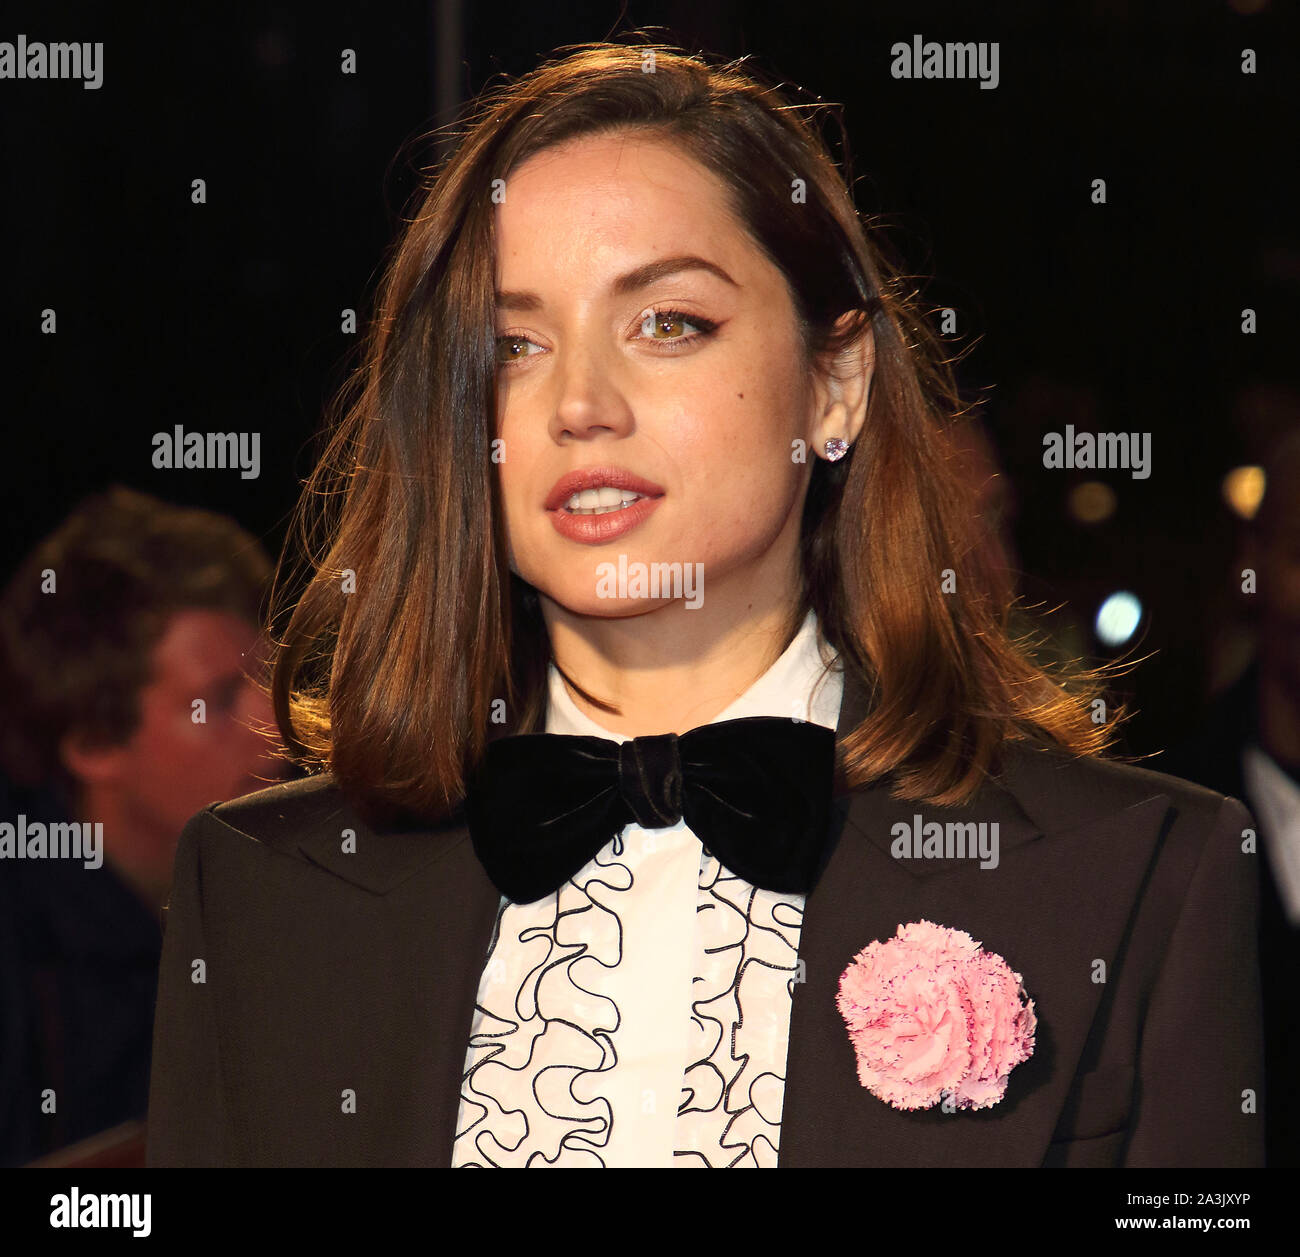 Ana de Armas attends The BFI 63rd London Film Festival, American Express Gala screening of 'Knives Out held at the Odeon Luxe, Leicester Square in London. Stock Photo